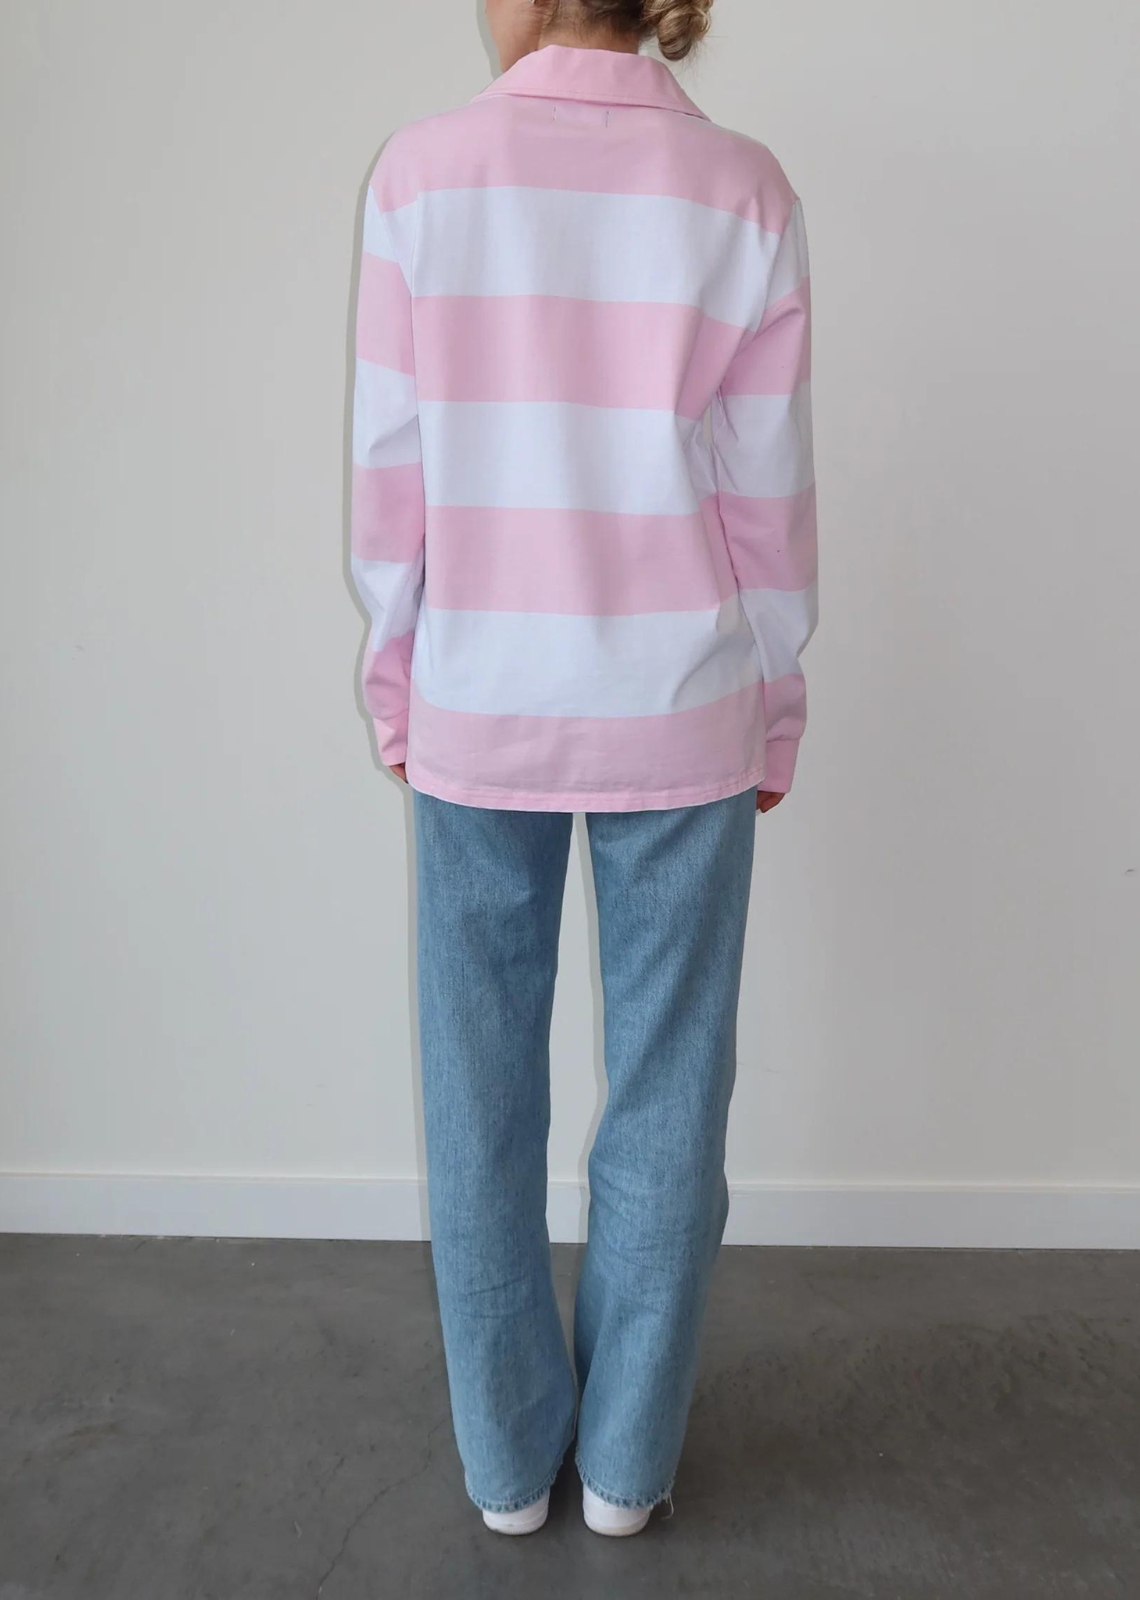 Brunette The Label The "HEART" Striped Rugby Shirt. Feel the love wherever you go in the "Heart" Striped Rugby Shirt in Baby Pink and White. It features bold stripes and a ribbed collar and sleeves. We recommend sizing up for a more oversized fit. 